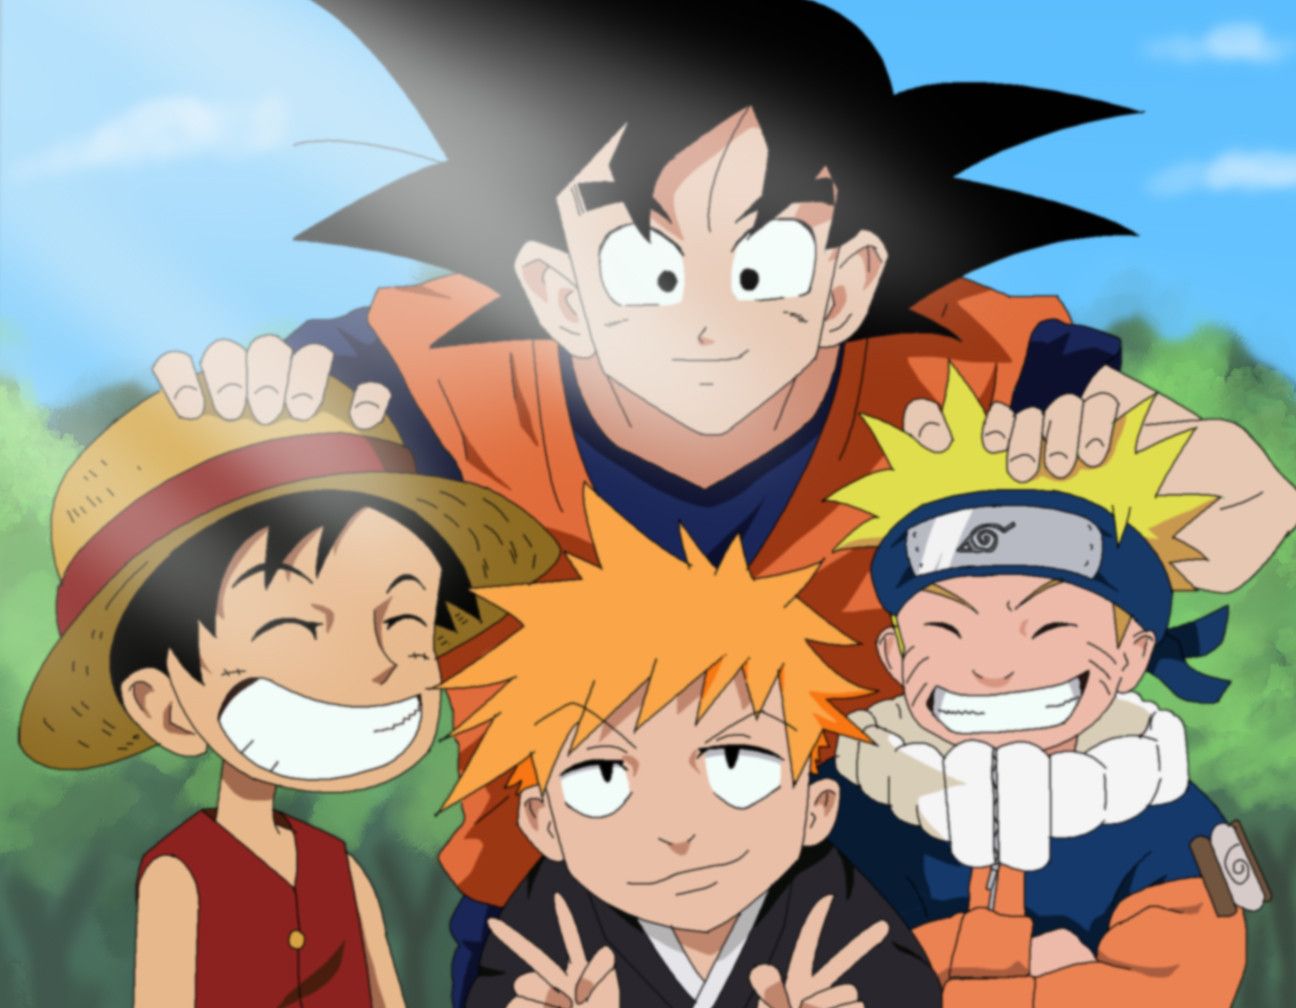 Anime One Piece And Naruto Wallpapers Wallpaper Cave